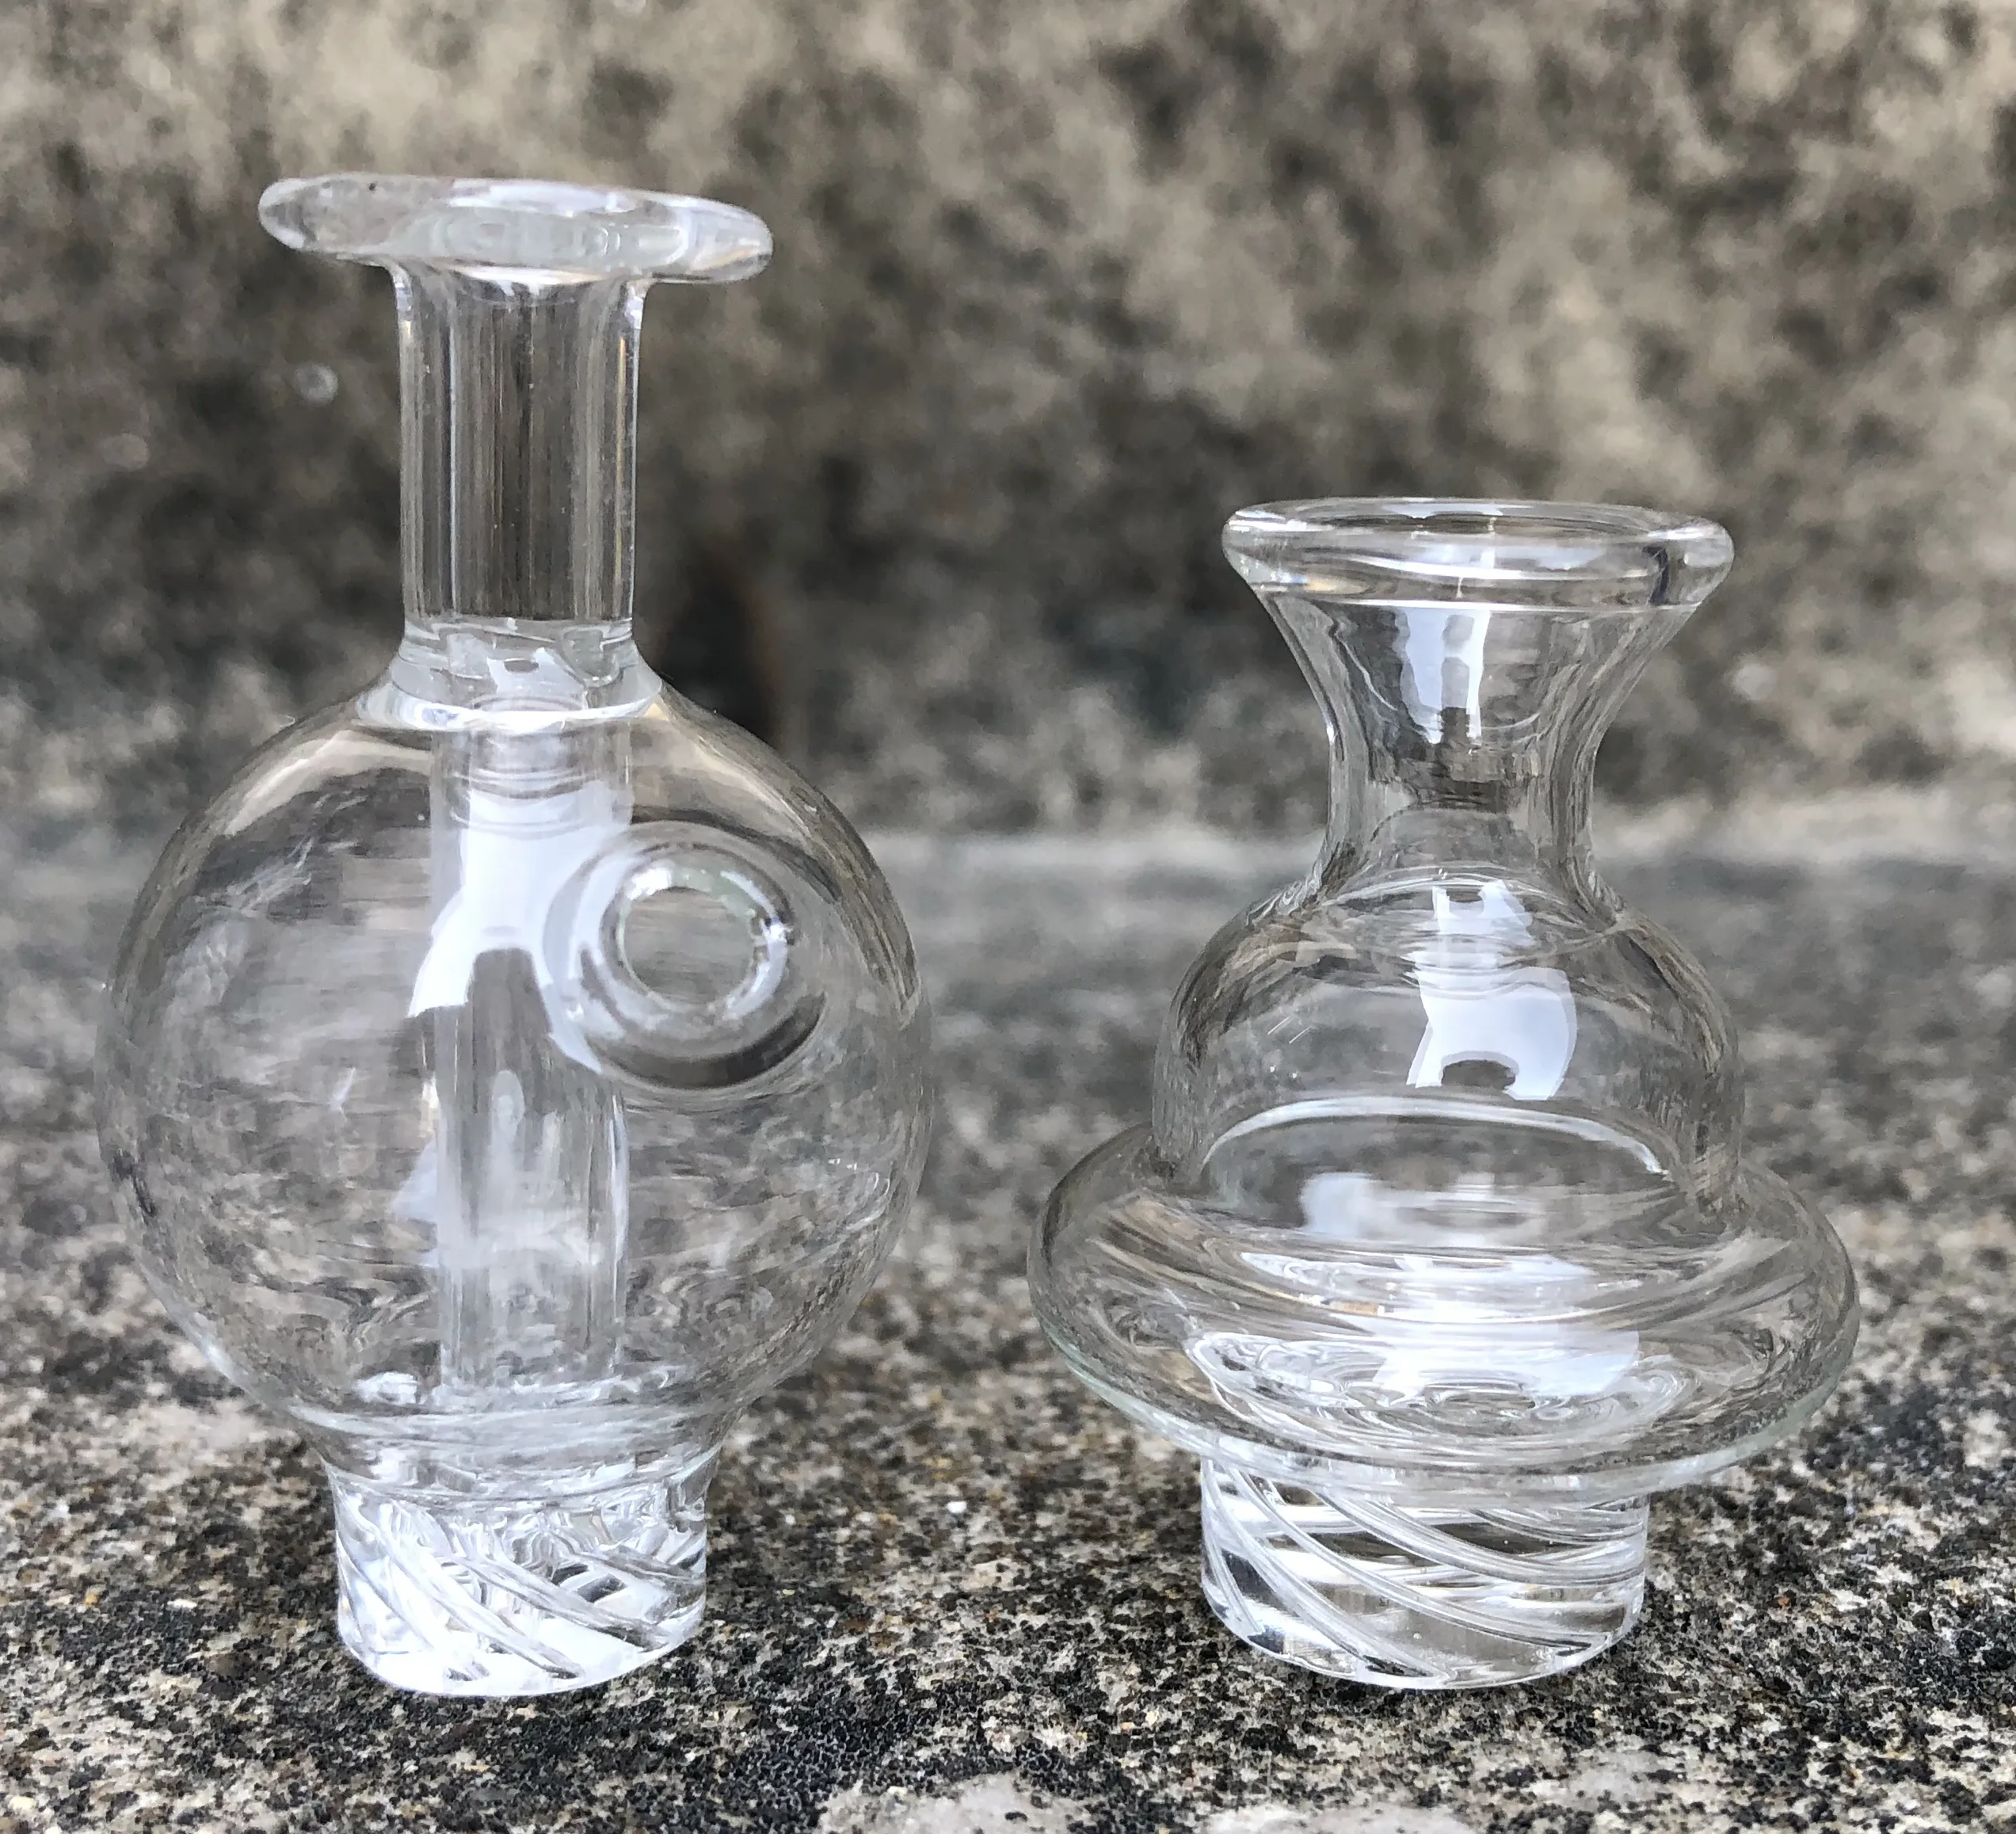 New Glass Carb Cap, Cyclone Riptide Spinning carb caps With Air Hole for Terp Pearl 30mm XXL quartz banger Nails bong